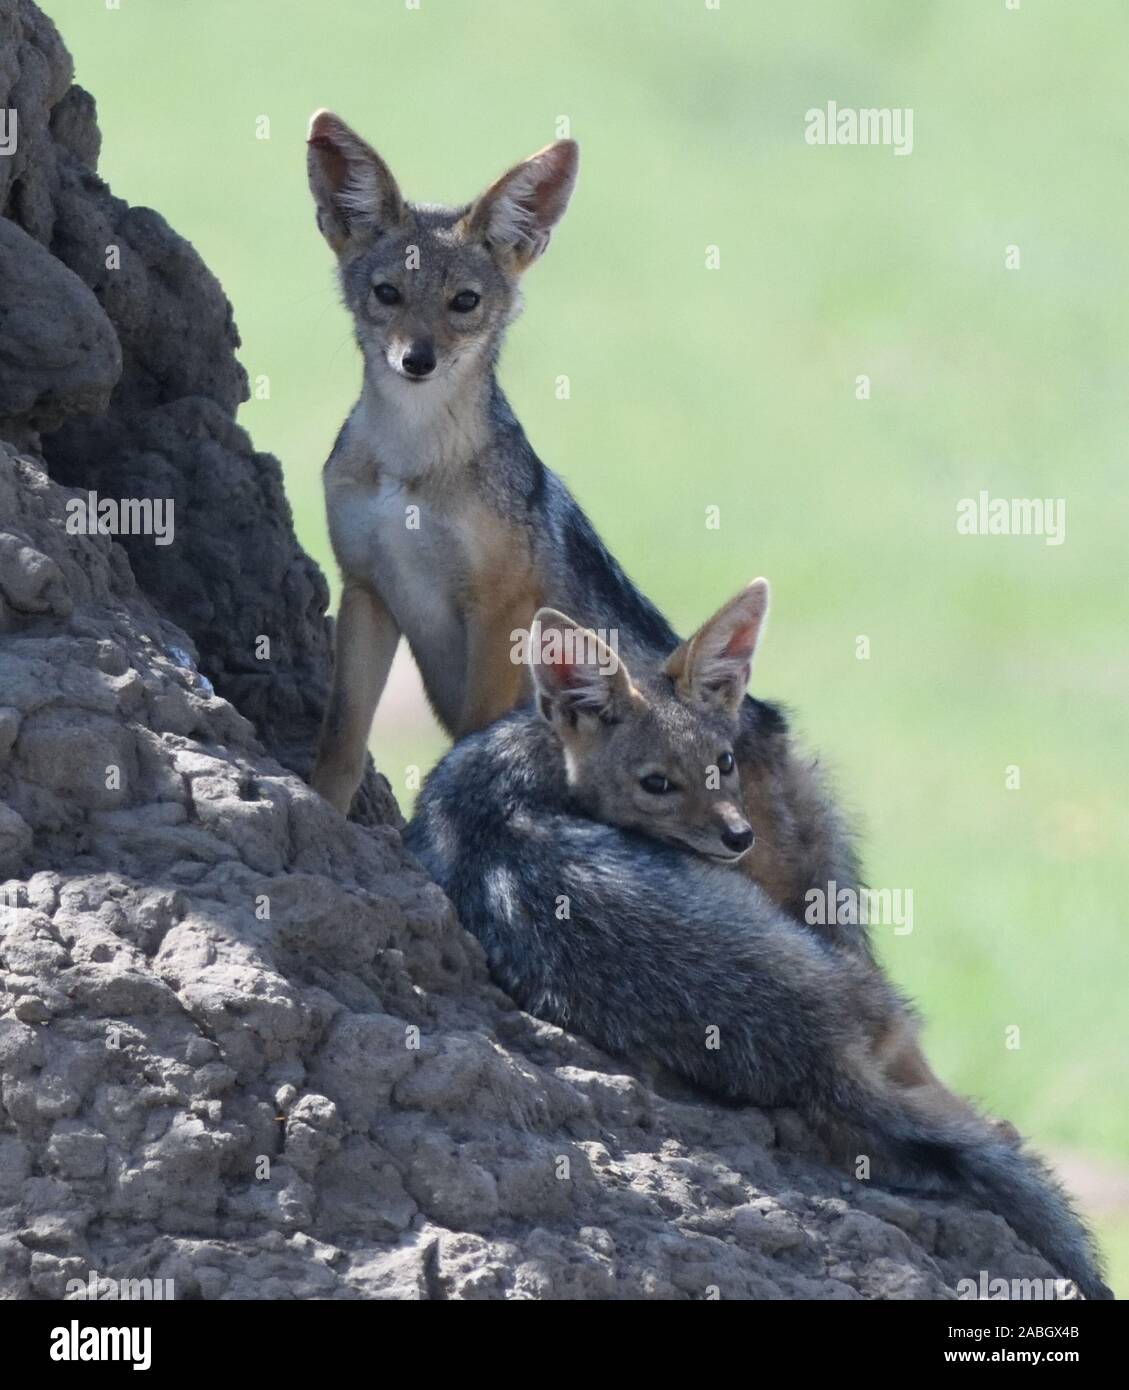 Black-backed jackal (Canis mesomelas) pups playing outside their den in a termite mound. Serengeti National Park, Tanzania. Stock Photo